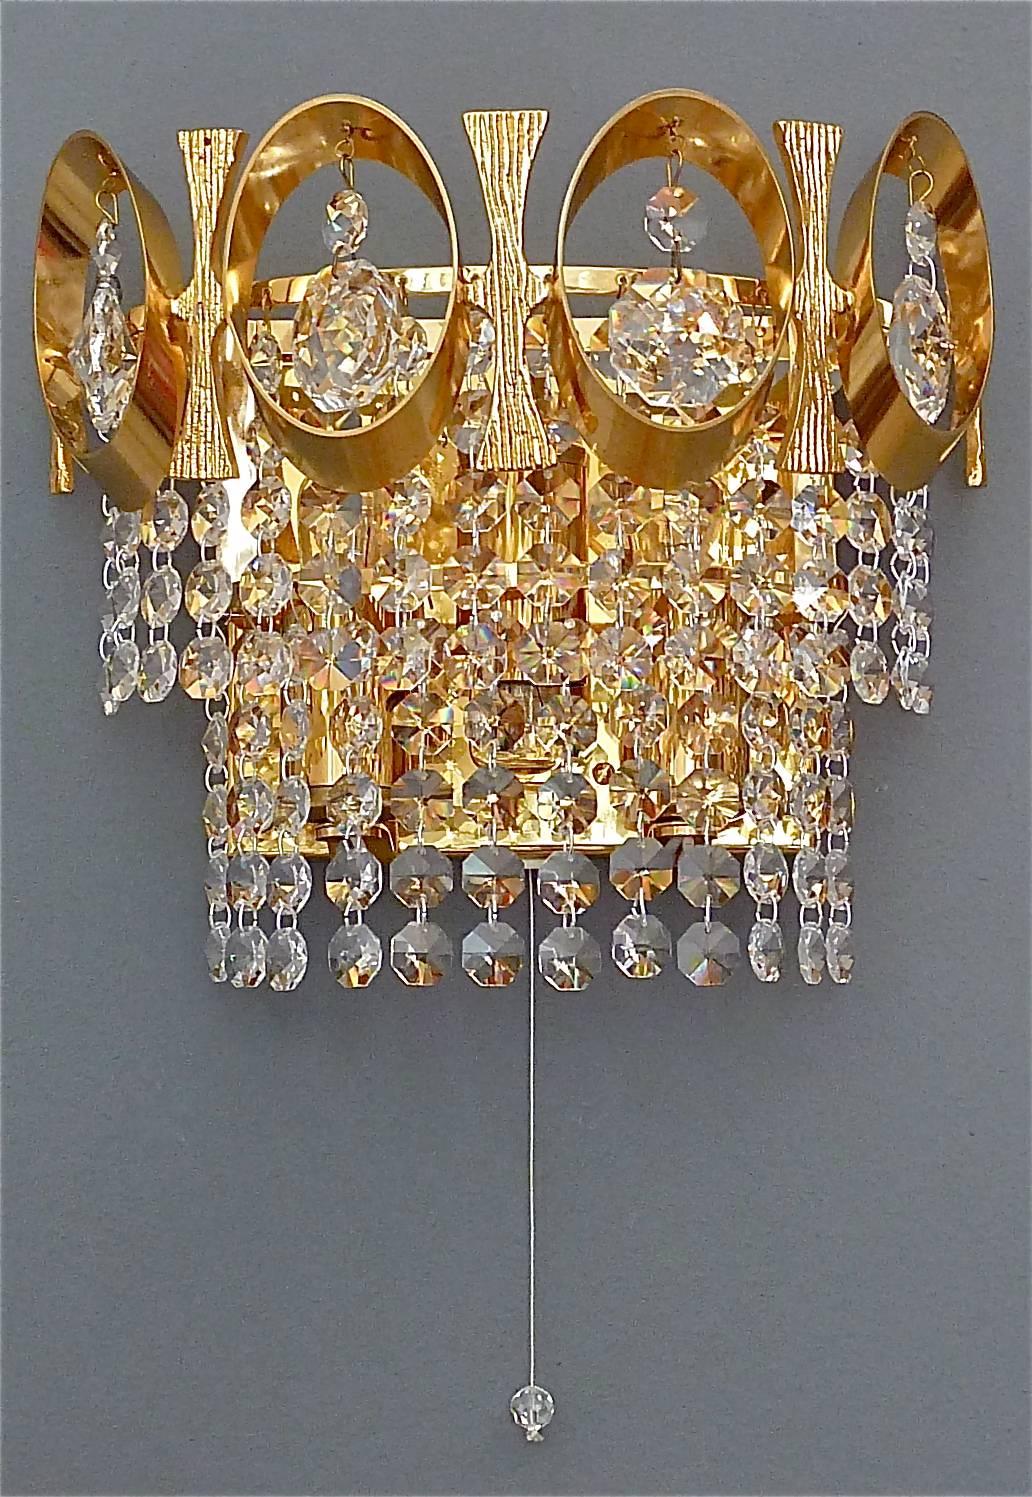 Pair of beautiful and precious wall lights or sconces by Palwa, Germany, circa 1960-1970. They are made of gilt brass and lots of sparkling faceted glass crystals with an oval crown application. The elegant and chic model is typical for Palwa,